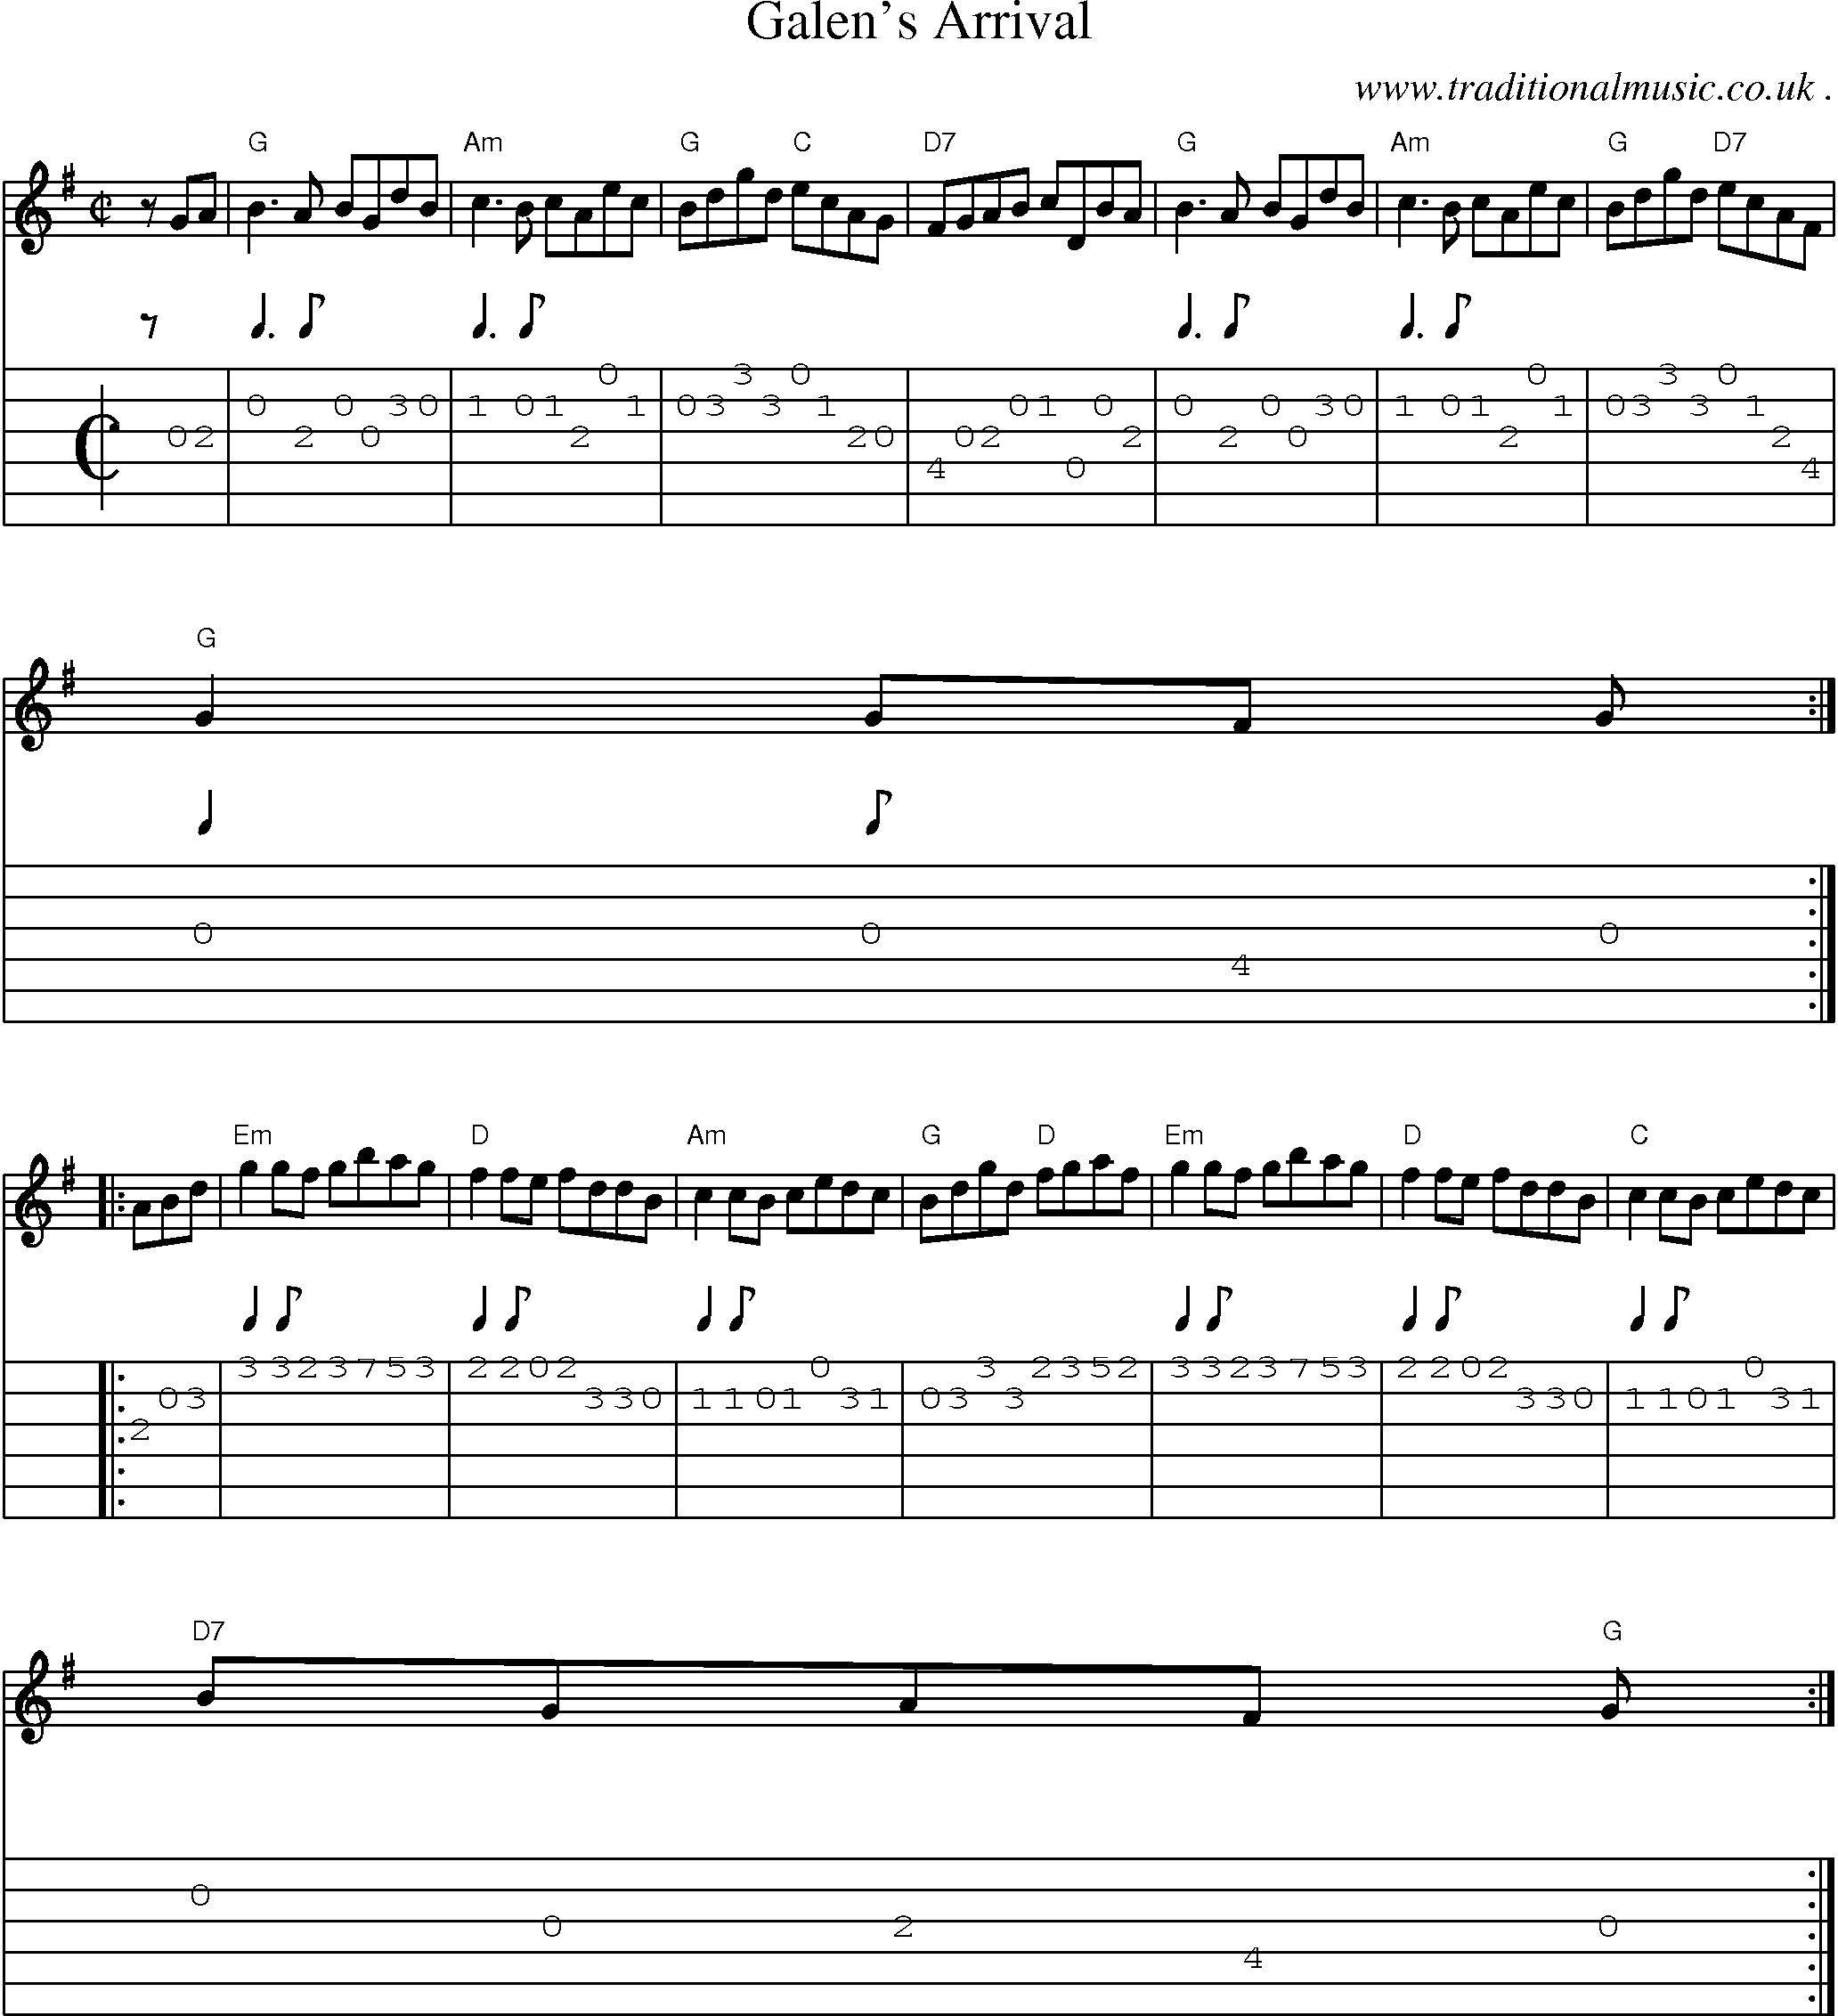 Sheet-music  score, Chords and Guitar Tabs for Galens Arrival